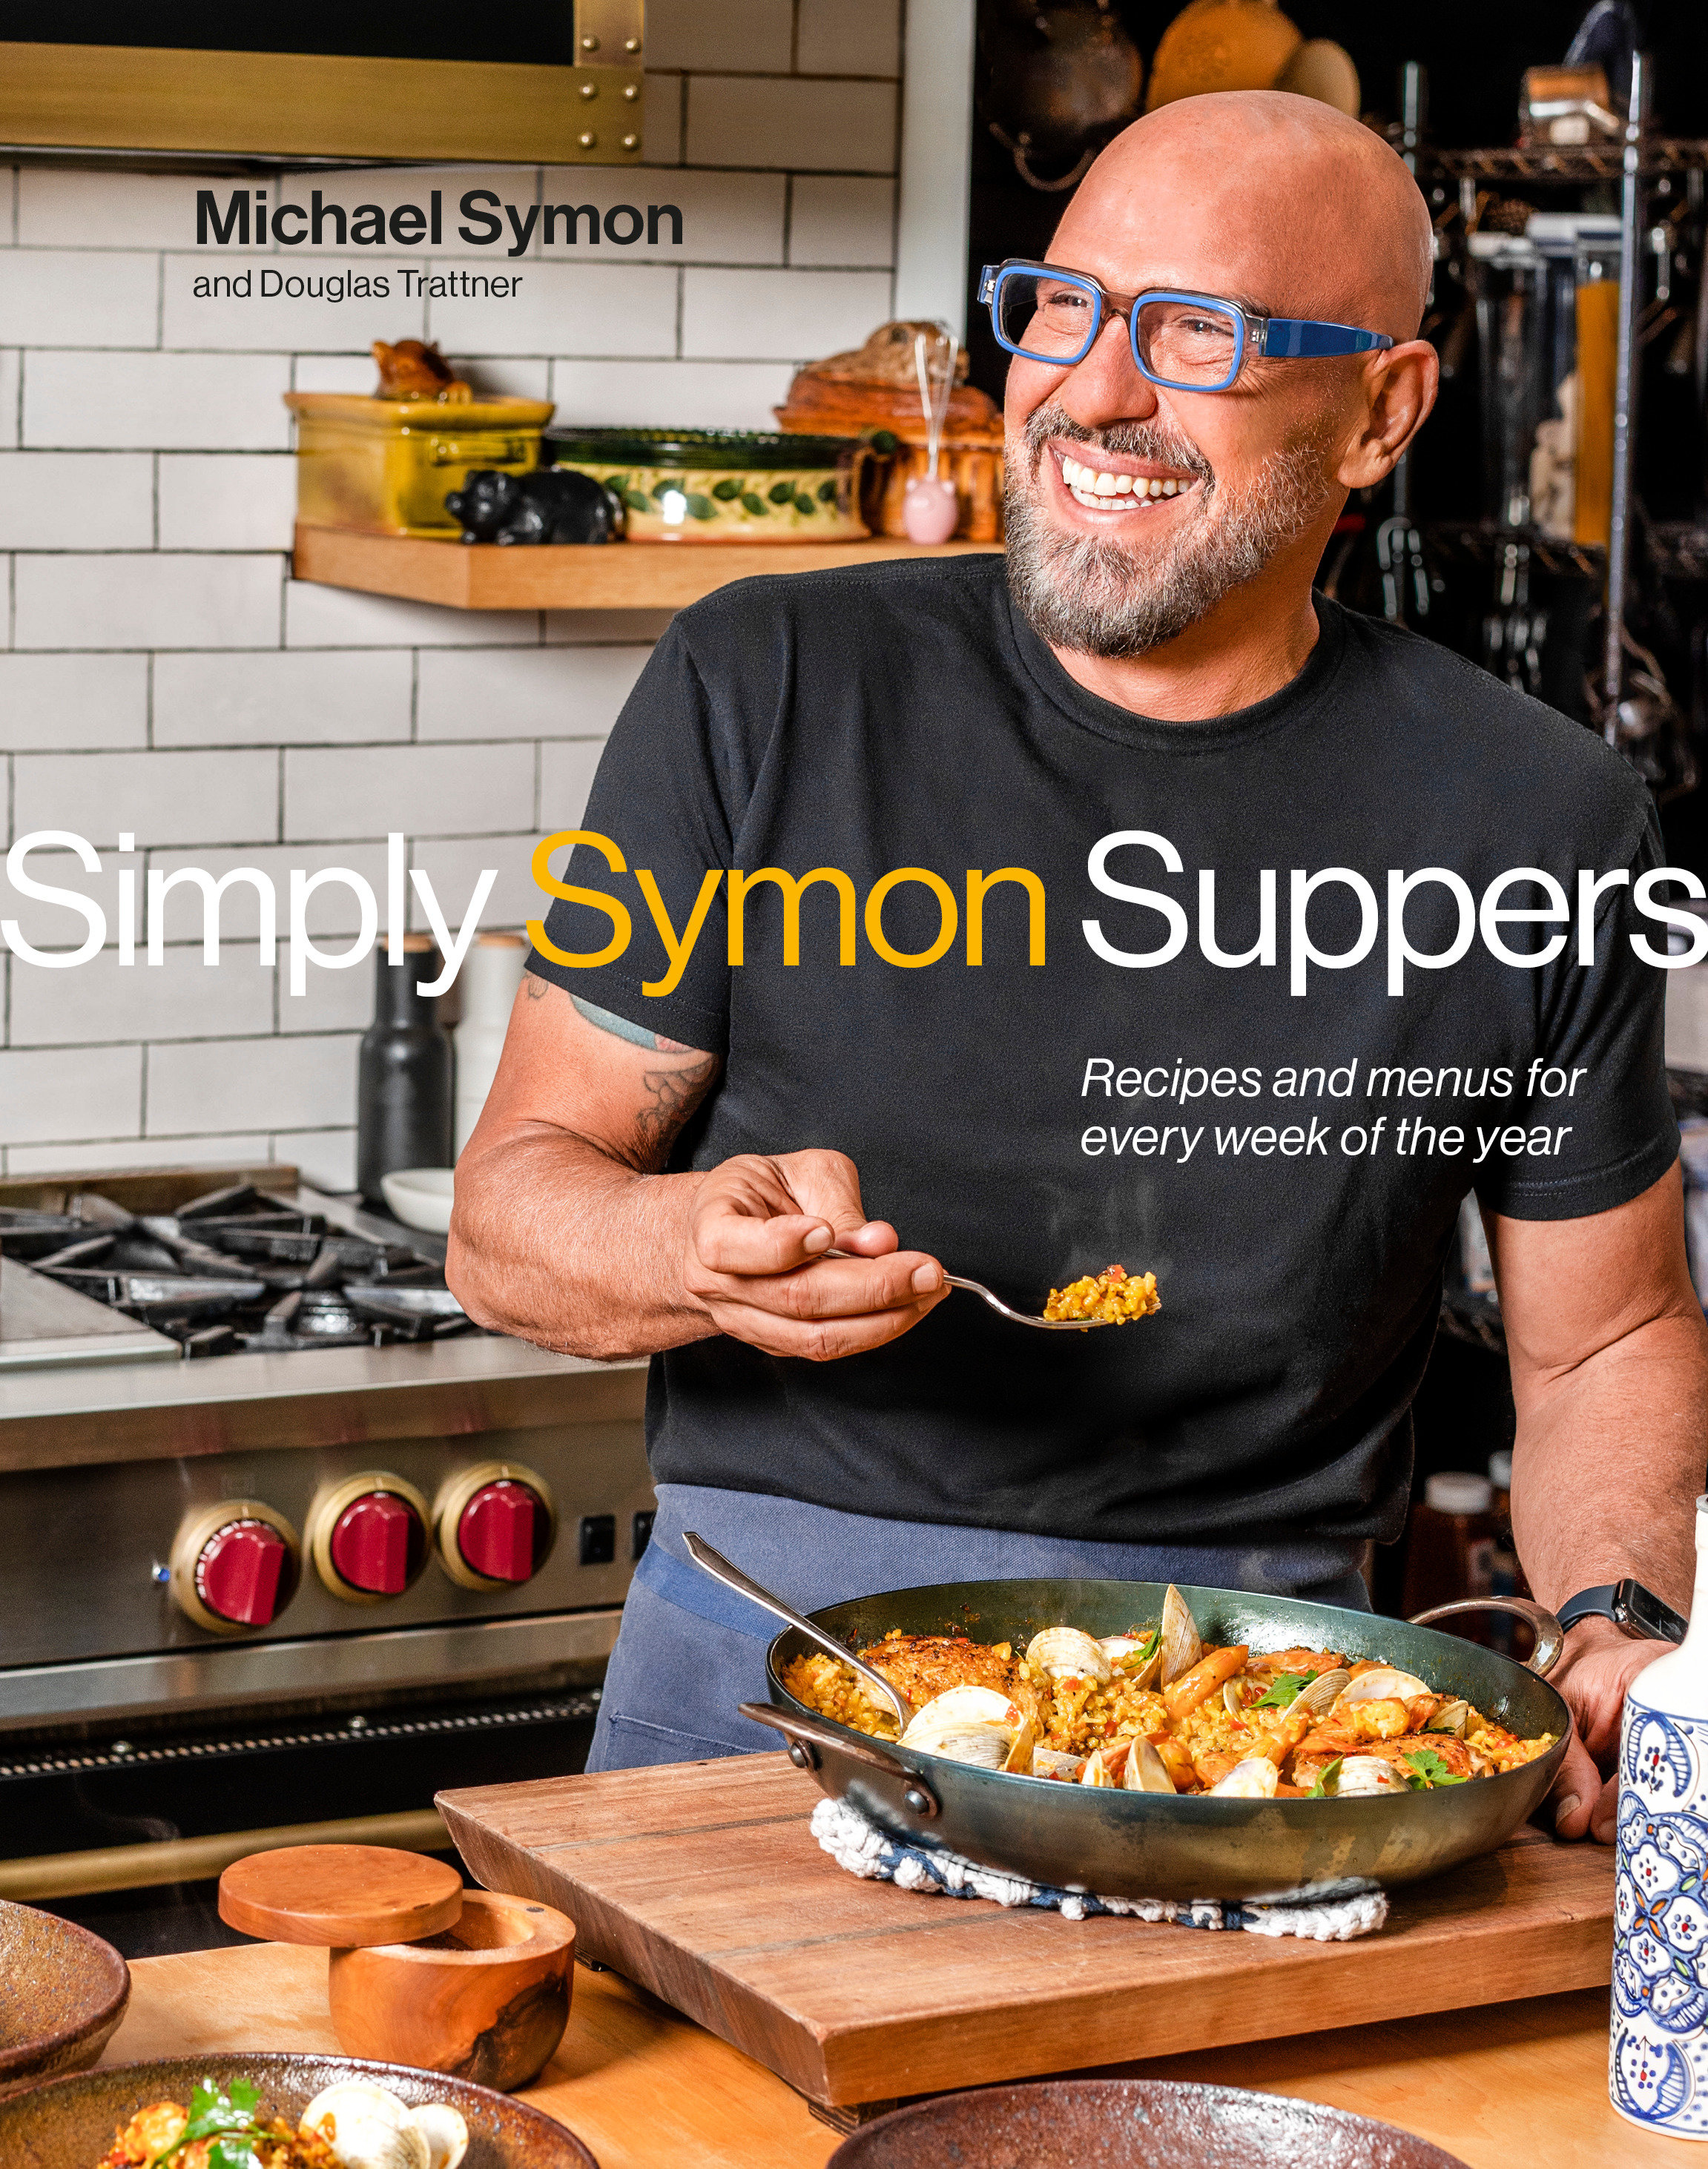 Simply Symon Suppers Recipes and Menus for Every Week of the Year: A Cookbook cover image